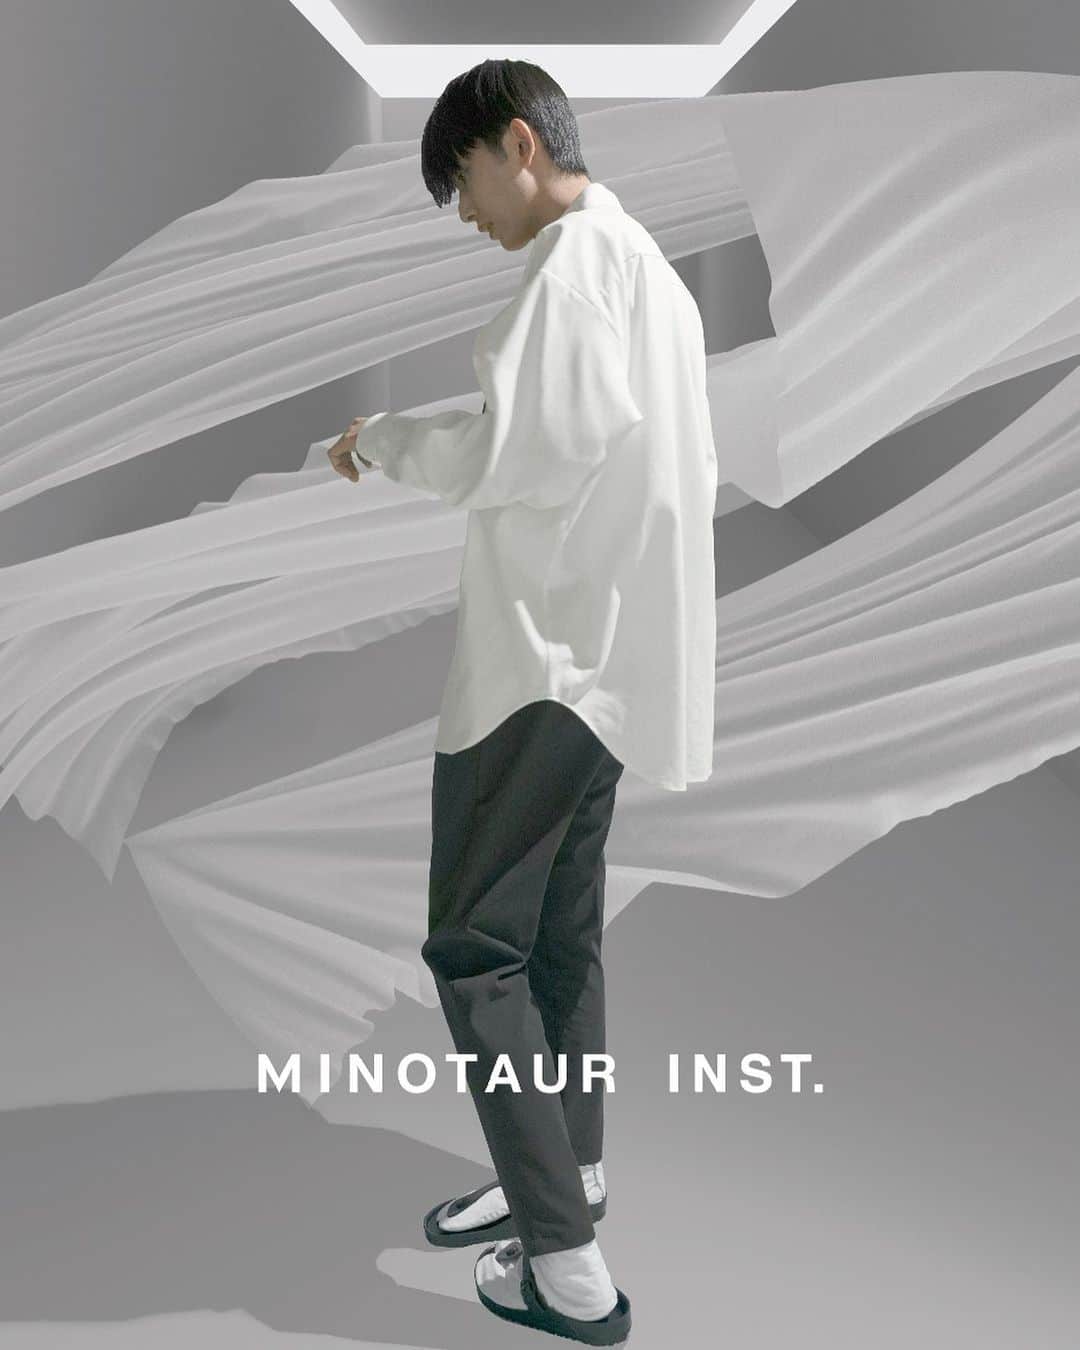 ミノトールのインスタグラム：「MINOTAUR INST. WASHI SHIRTS  FUNCTION: ANTI BACTERIAL DEODORIZATION QUICK DRYING WATER ABSORPTION  Production : Made in Japan Material : Made in Japan  和紙布は、皮膚周辺及び室内空気の浄化作用、解毒作用、化学繊維と組み合わせた際の静電気が発生しない事や、何よりもヒトとの生体親和性が良く体調維持にとても大切な役割を果たしてくれる。 更に夏は涼しく、冬は暖かいオールシーズン素材。 リラックスシルエットで和紙布独特の風合いがあり、機能性豊富なポテンシャルの高いテクニカルシャツ。 天然素材とテックの融合により、ドライタッチで軽量 / 吸水速乾 / 消臭 / 抗菌機能の、リラックススマートシャツ  Washi cloth has a purifying effect on the skin and indoor air, a detoxifying effect, does not generate static electricity when combined with chemical fibers, and above all, has good biocompatibility with humans and plays a very important role in maintaining physical condition. . Furthermore, it is an all-season material that is cool in the summer and warm in the winter. A technical shirt with a relaxed silhouette and the unique texture of Japanese paper cloth, and a high potential for functionality. A relaxing smart shirt that is dry to the touch, lightweight, absorbs water, dries quickly, deodorizes, and has antibacterial functions by combining natural materials and technology.  #minotaur_inst #minotaurinst #minotaur #ミノトールインスト #ミノトール #functional #comfortable #miyashitapark #tech #techwear #テック #relaxsmart #リラックススマート #relaxsmartwear #リラックススマートウェア #washi #和紙 #unisex #ユニセックス」